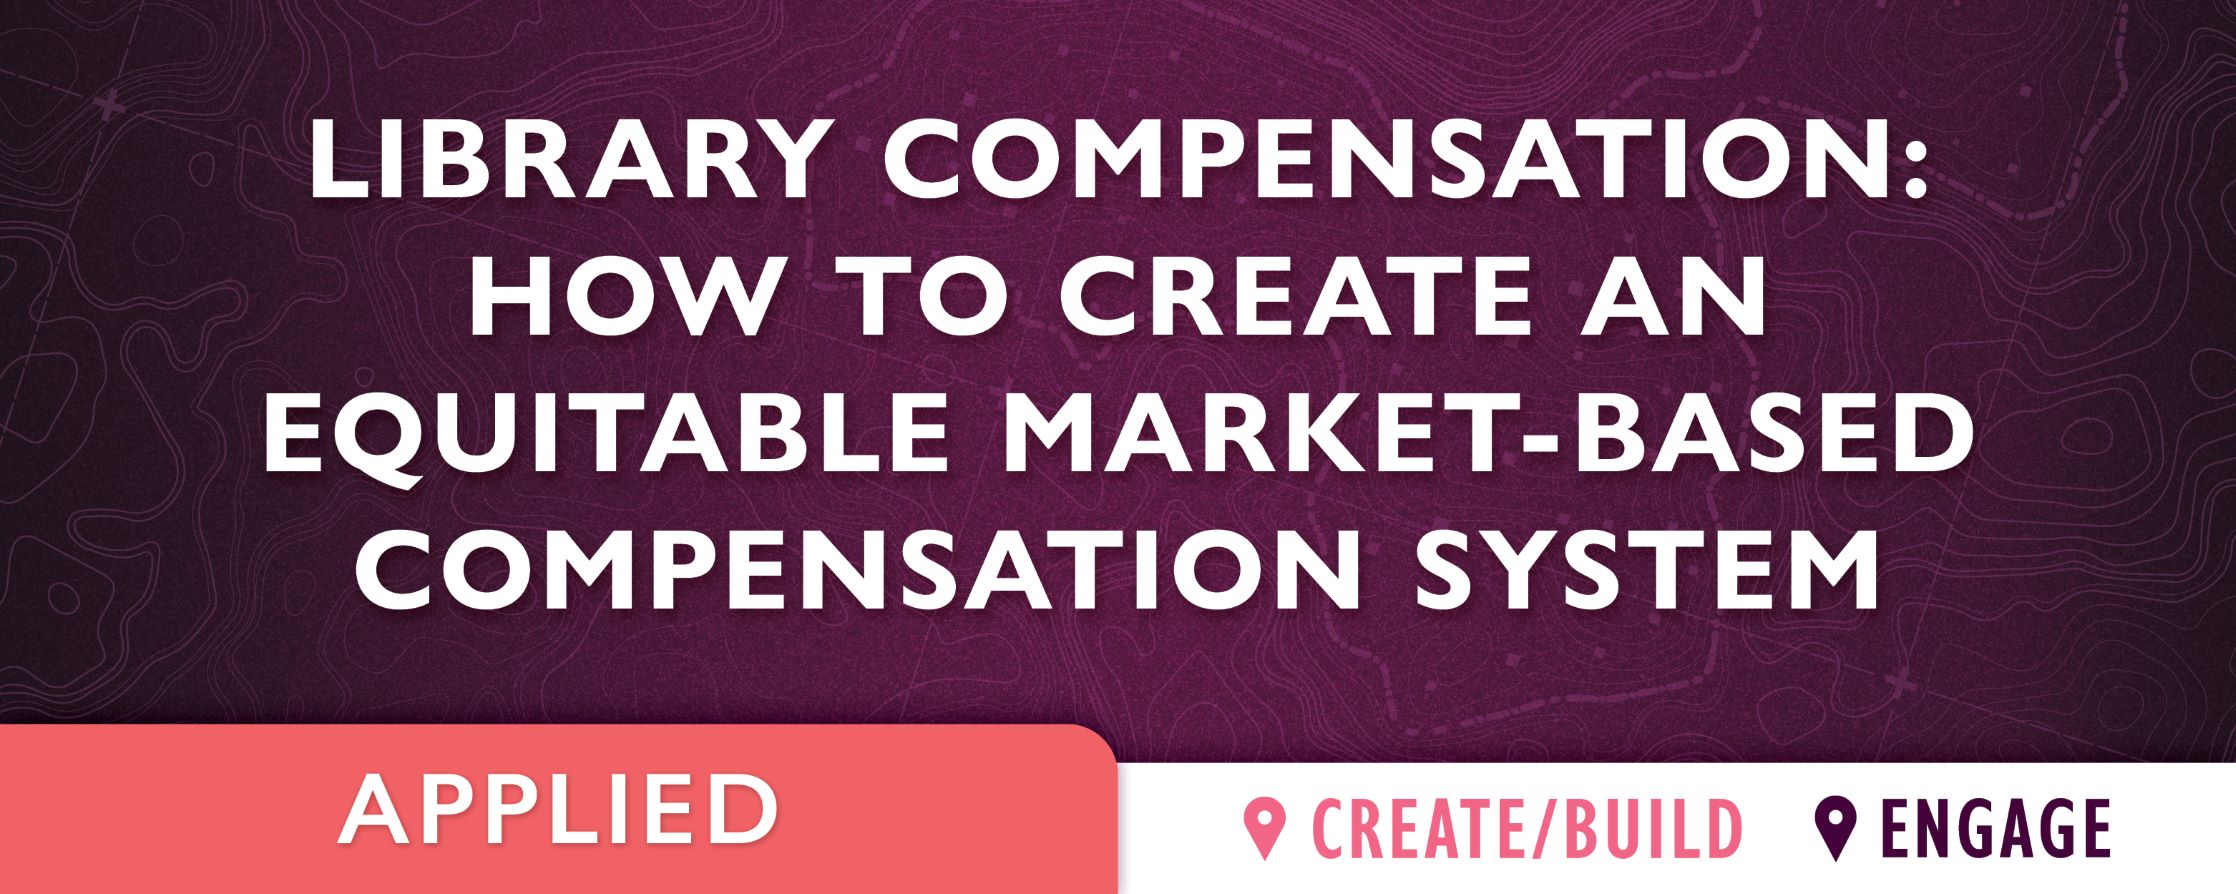 purple background with text: Library Compensation: How to Create an Equitable Market-Based Compensation System